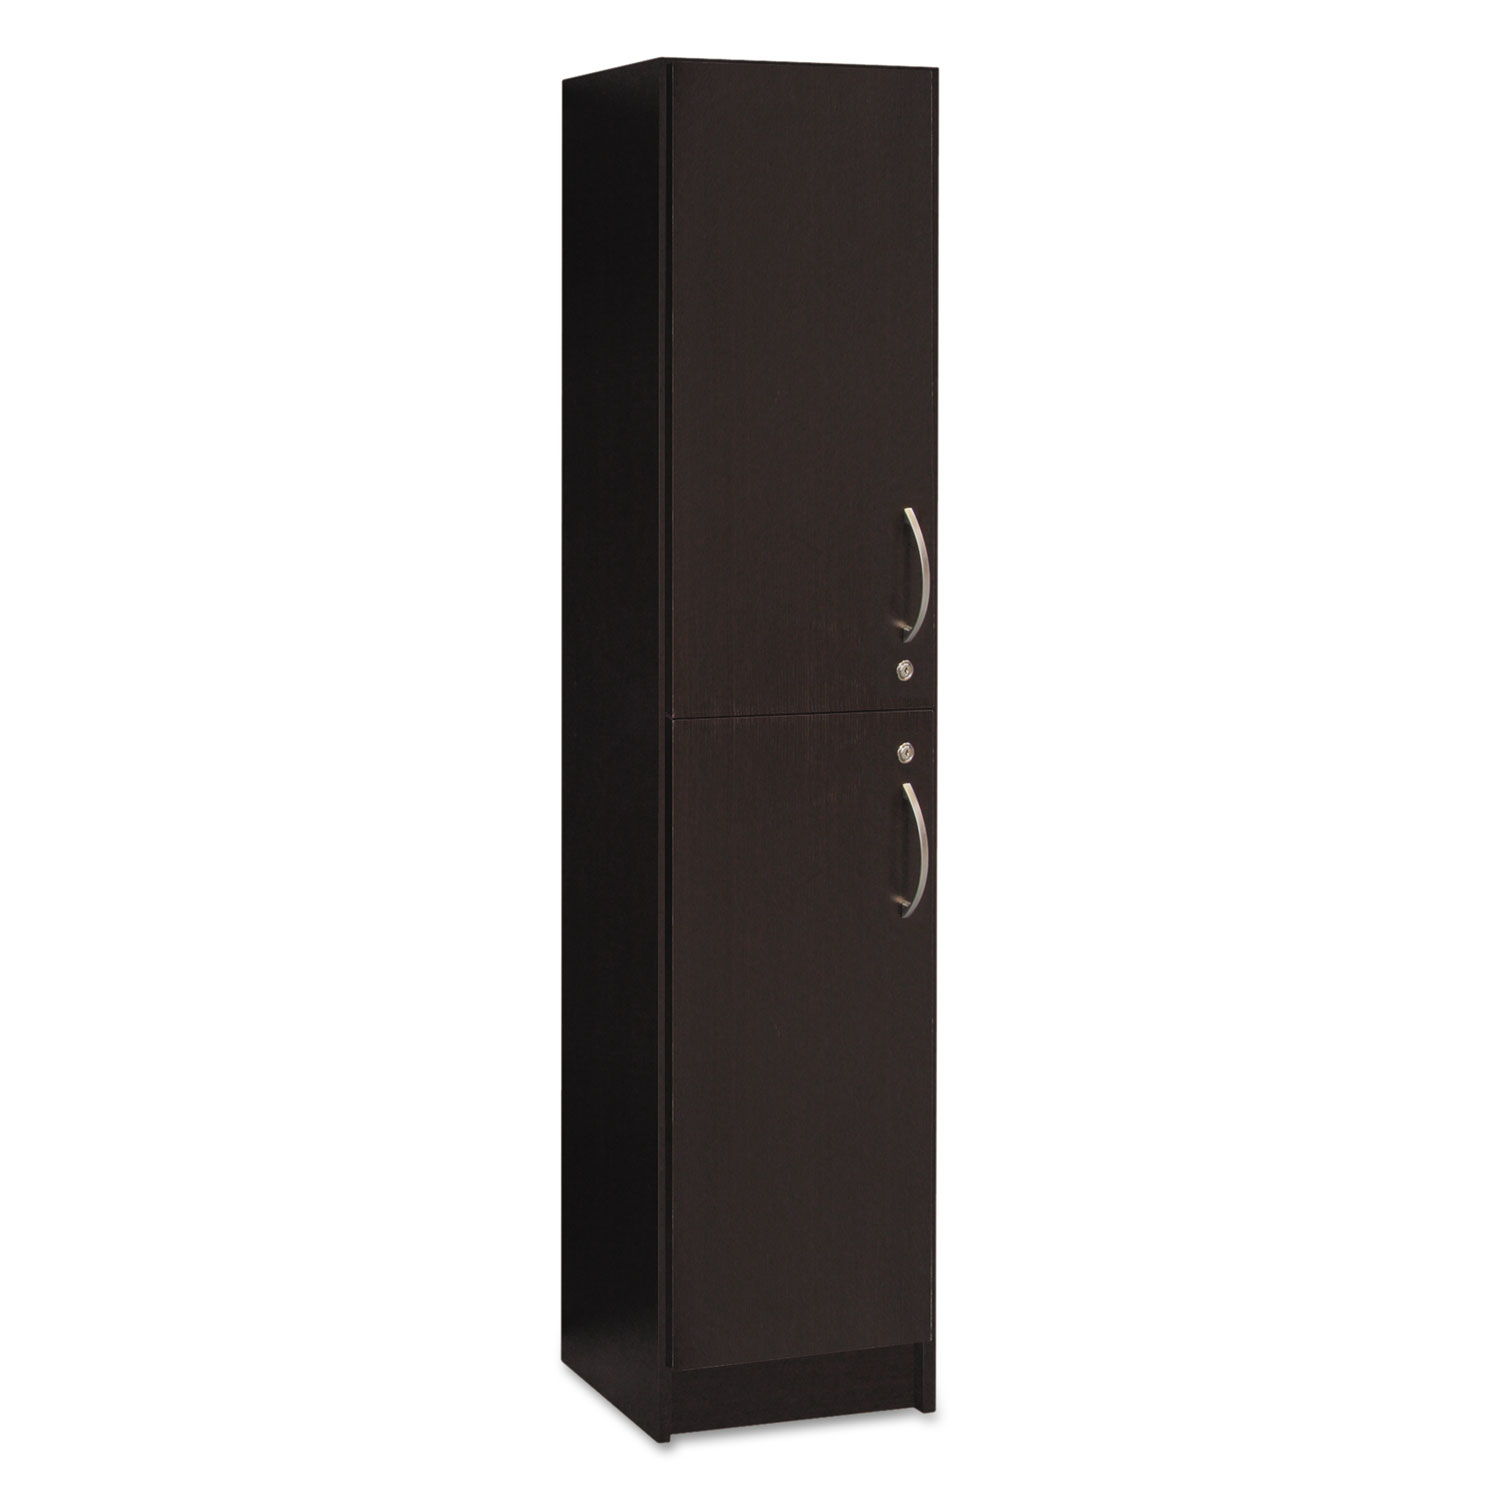 Base Cabinet, Two Door Pantry, 14 3/4 x 19 5/8 x 76 1/4, Espresso/White